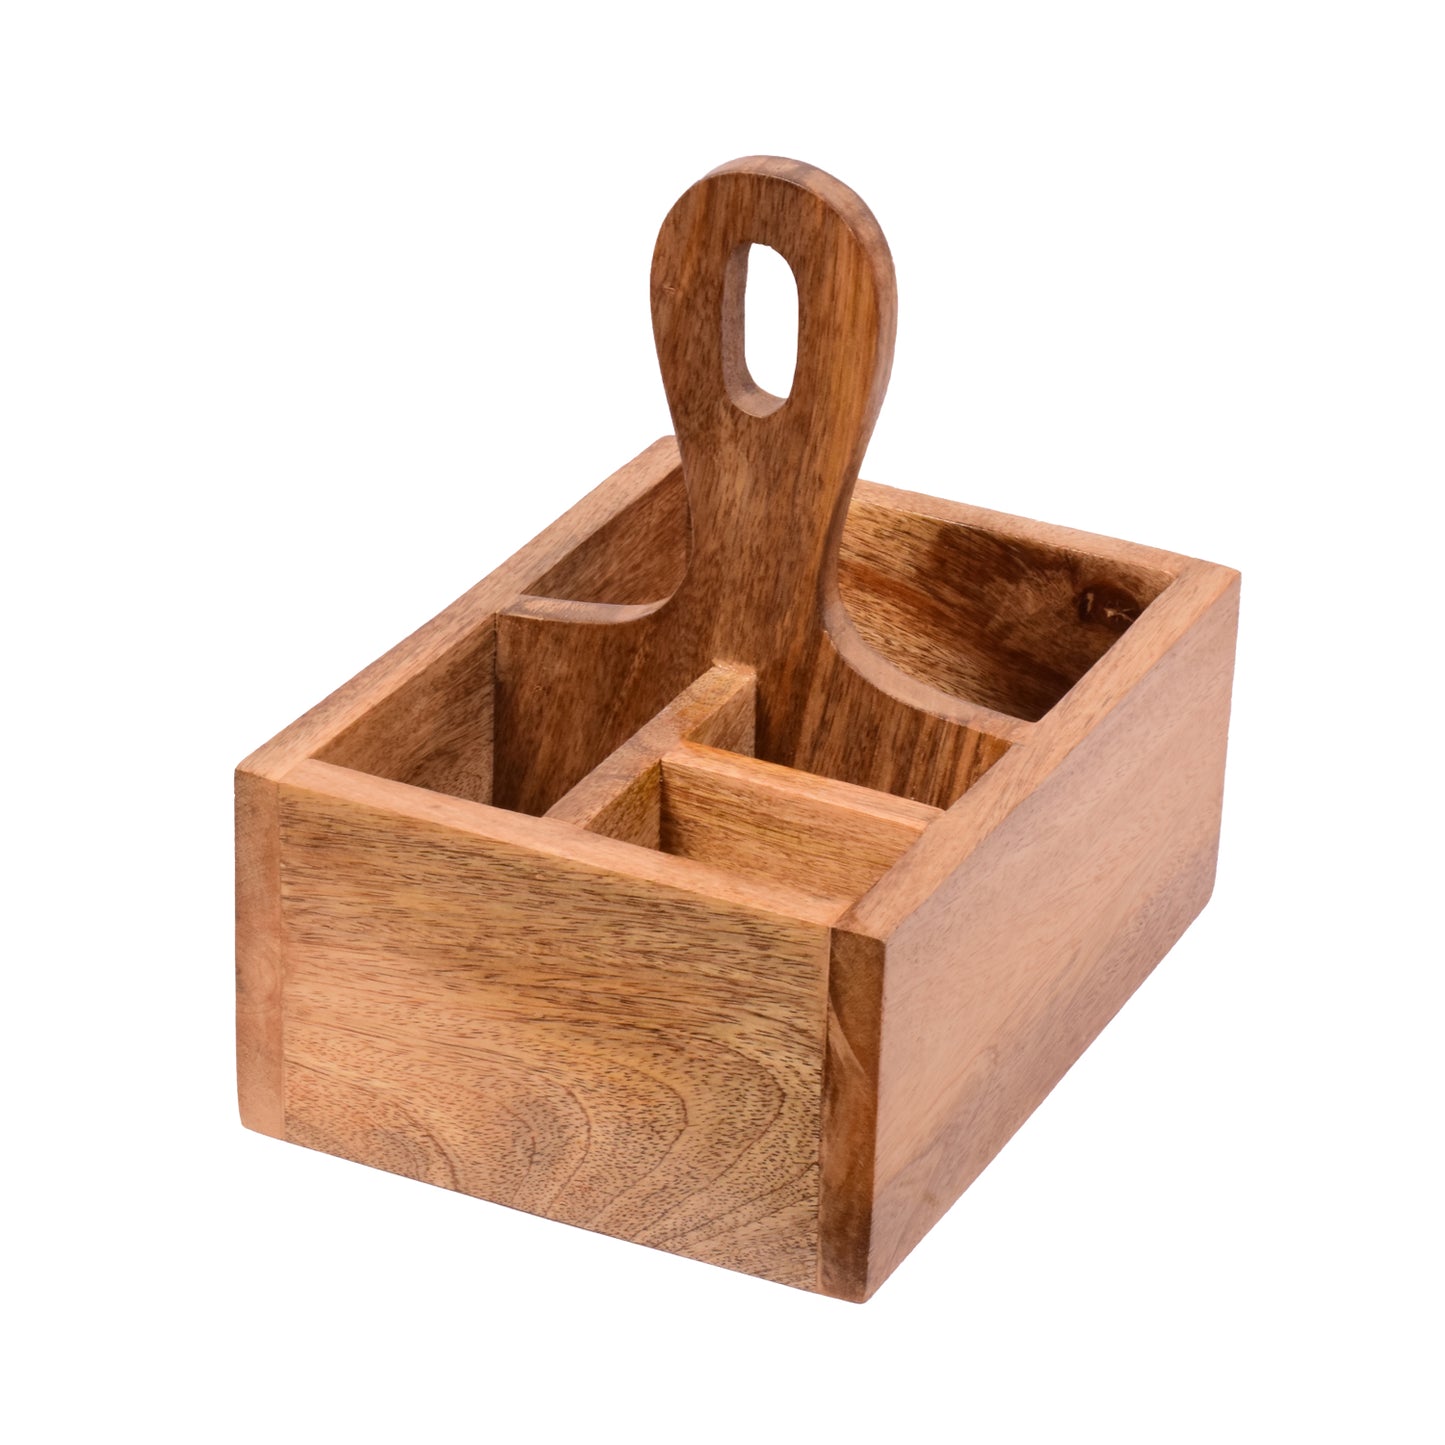 The Weaver's Nest Spoon Stand Cutlery Holder and Table Organizer for Dining Table and Kitchen